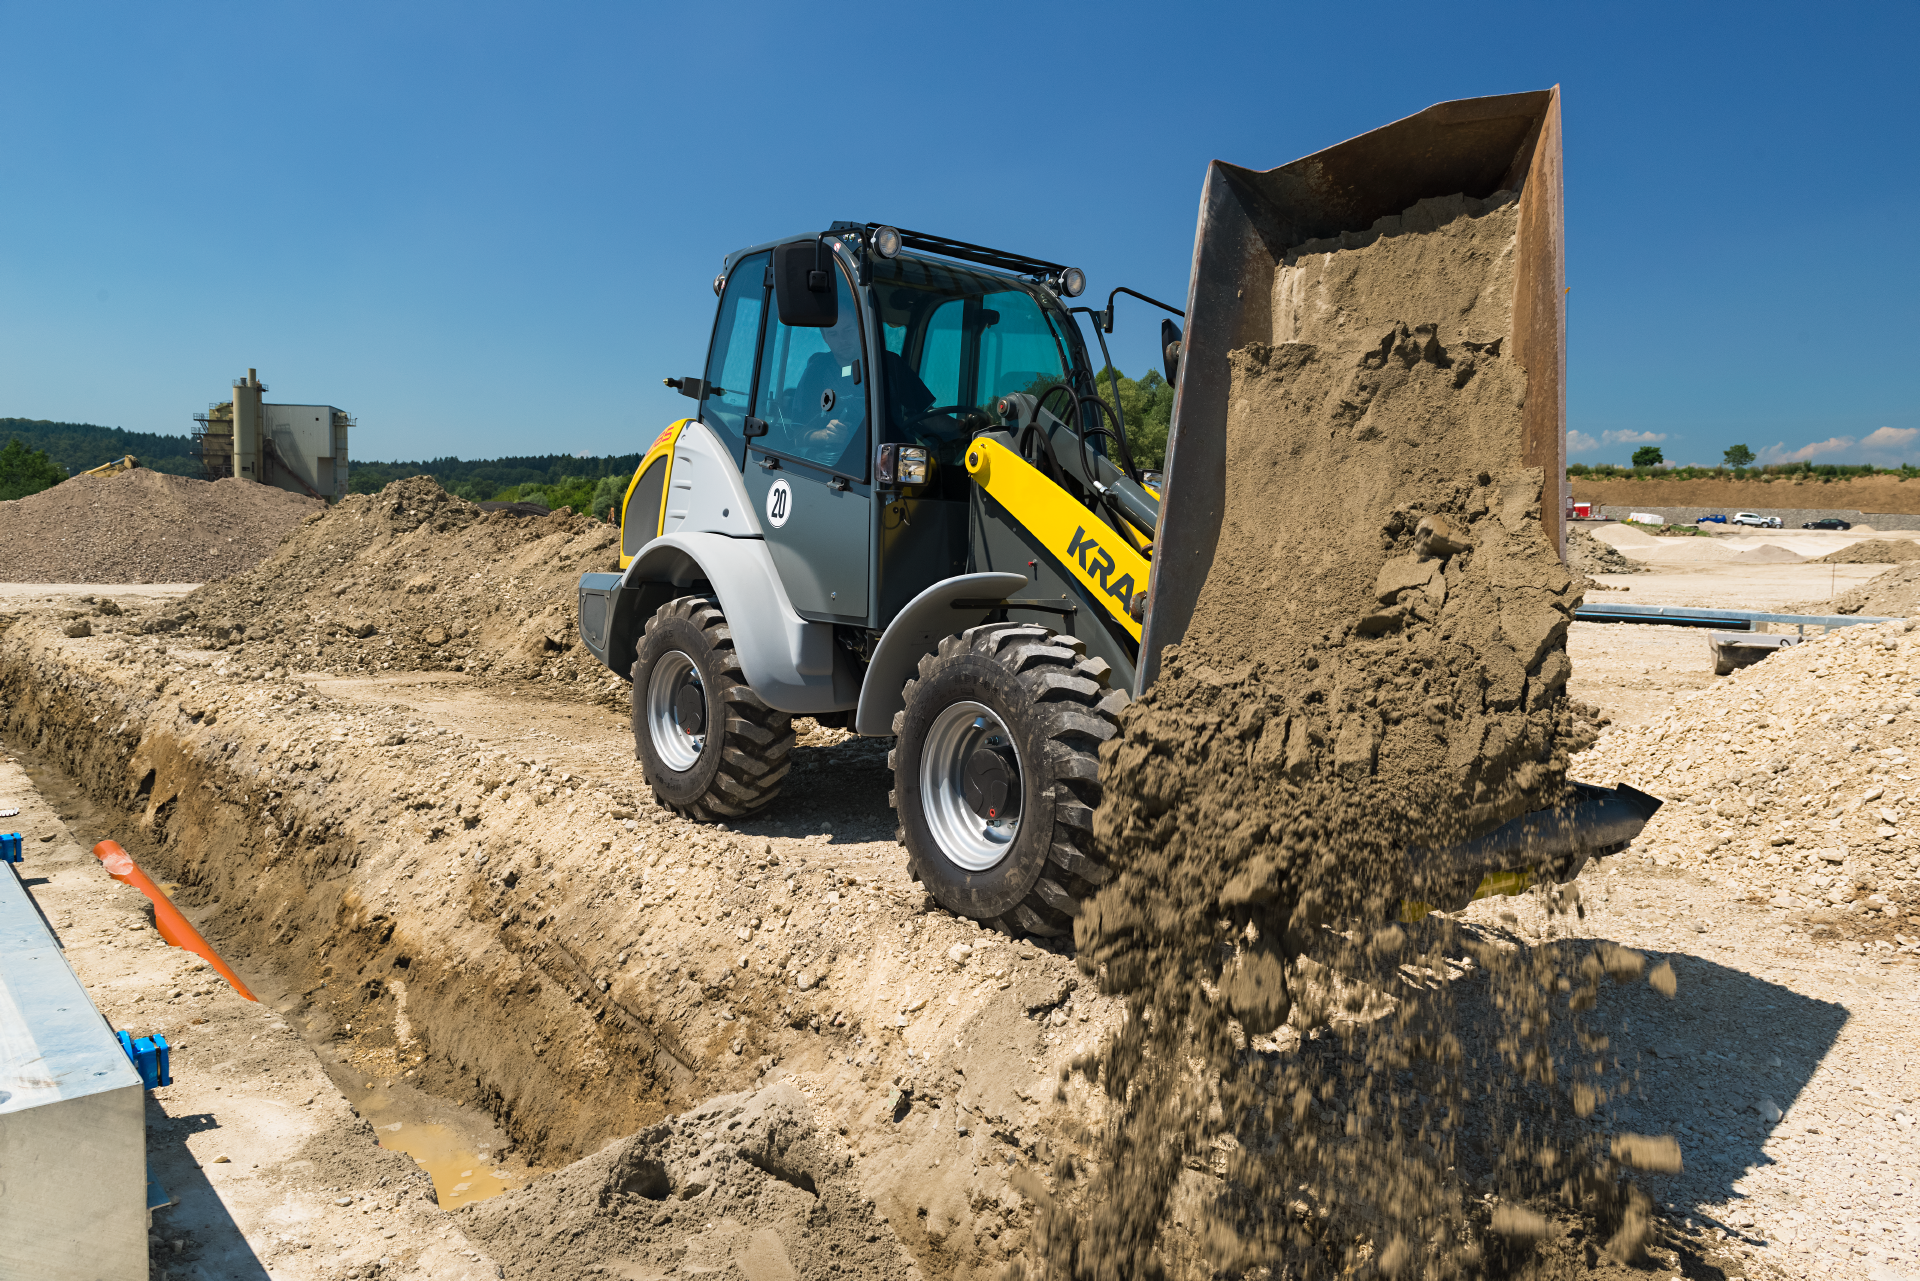 The Kramer wheel loader 5085 while working with soil.